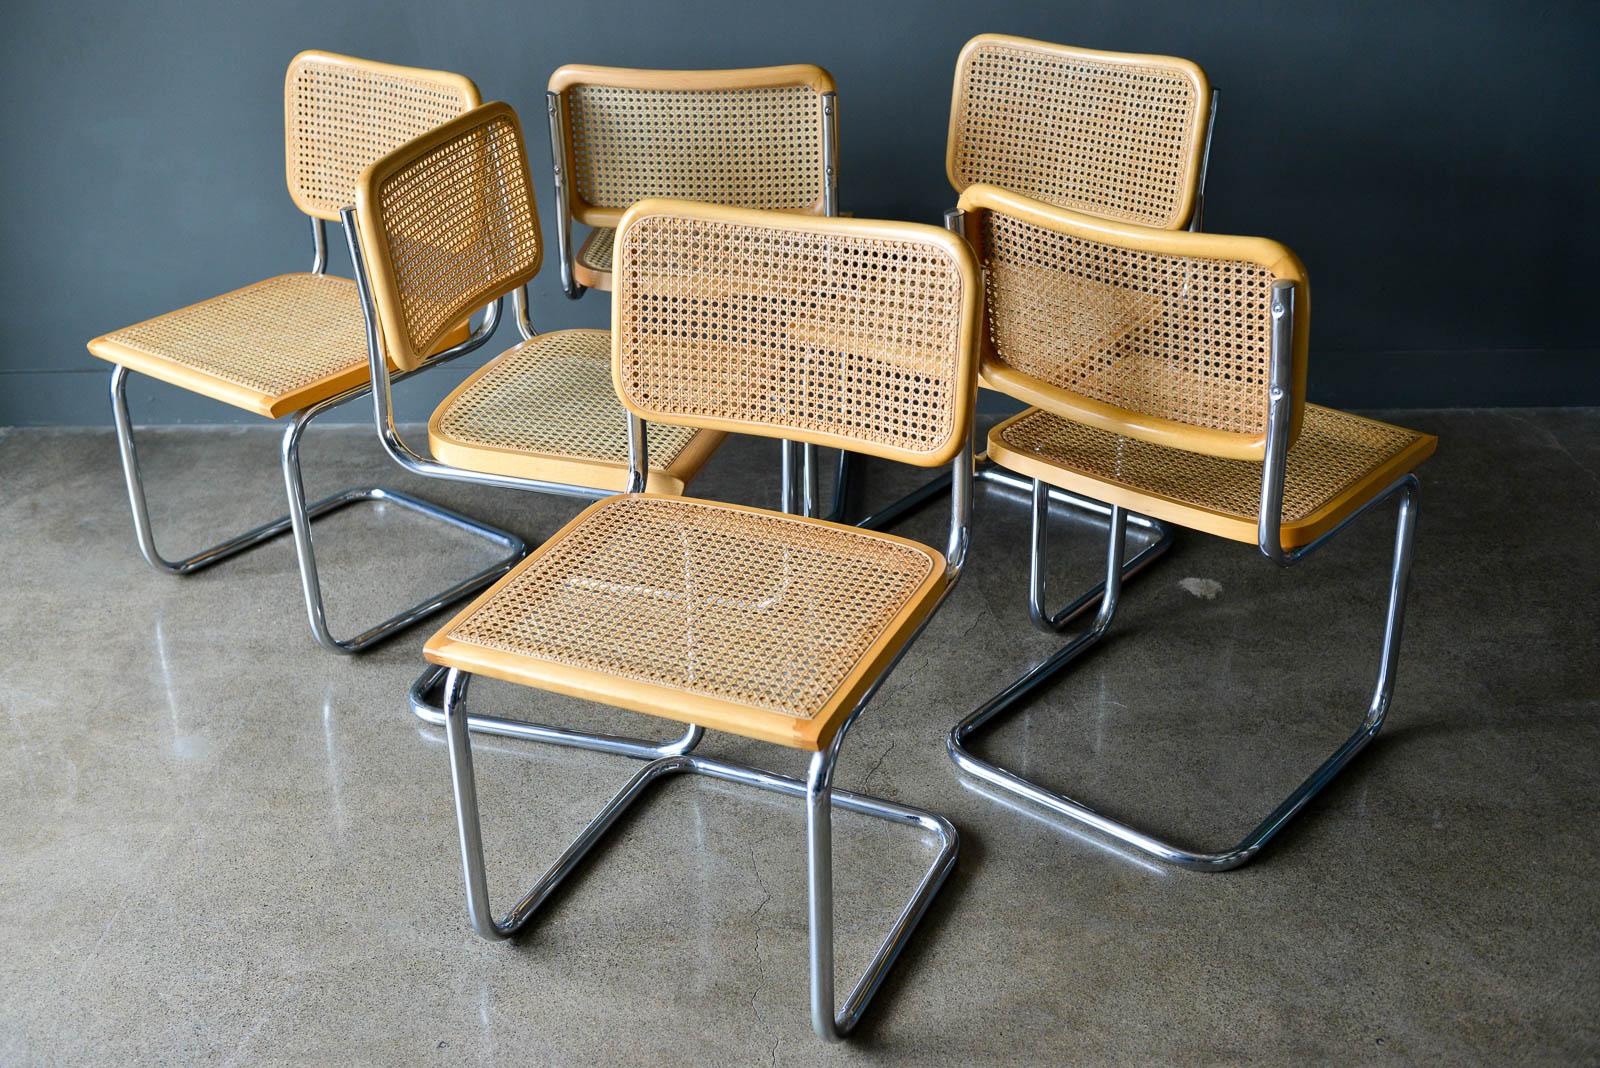 Set of 6 Cesca Cane and Bentwood Dining Chairs by Marcel Breuer, ca. 1960. Made in Italy, these beautiful chairs are in very good vintage condition with only slight wear. Cane is perfect and intact and chrome is bright and shiny with only slight